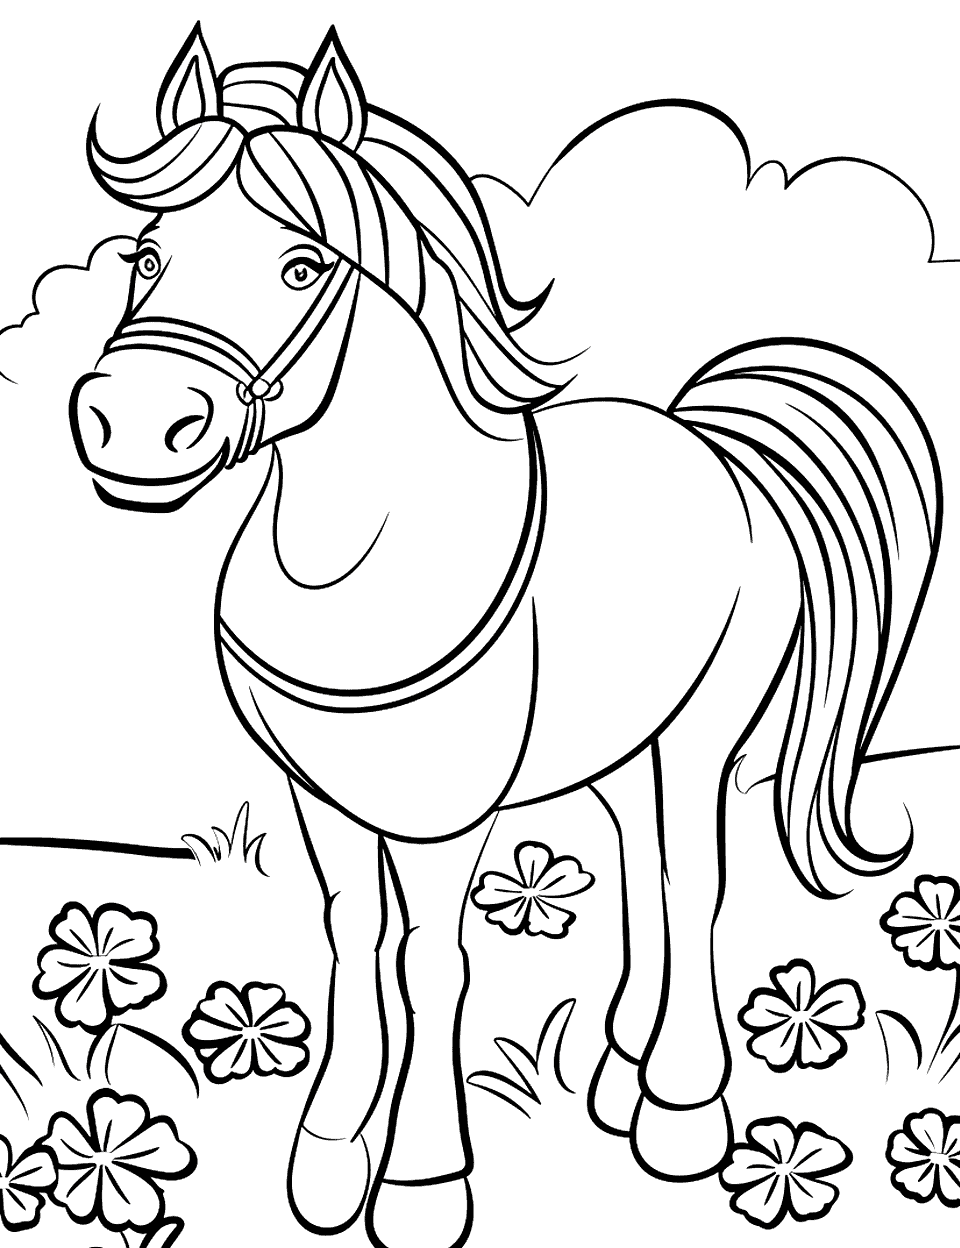 Horse with Shamrocks Shamrock Coloring Page - A majestic horse standing in a shamrock meadow.